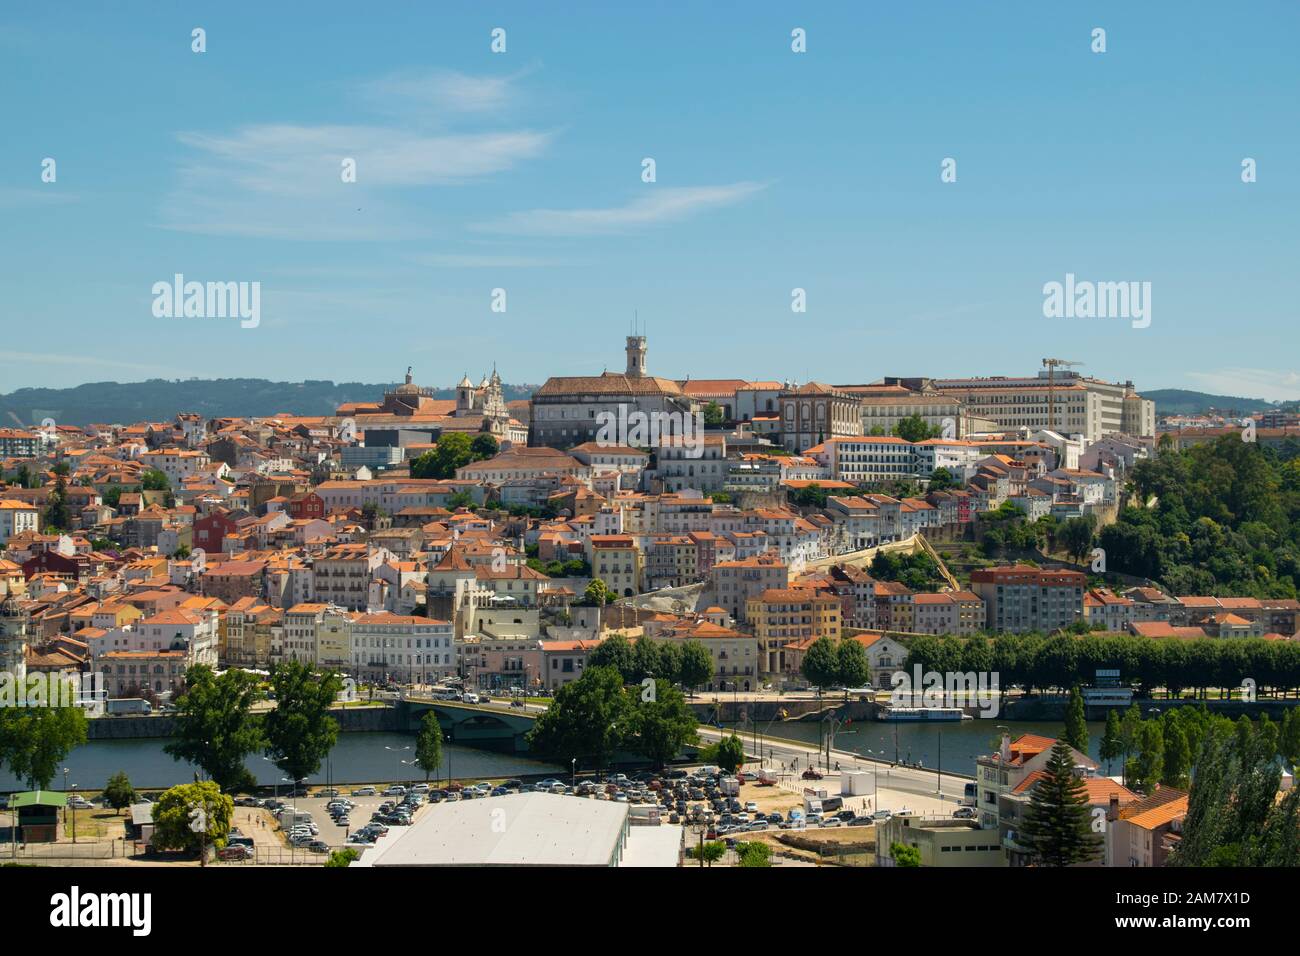 General view of the ancient university city of Coimbra Portugal Stock Photo